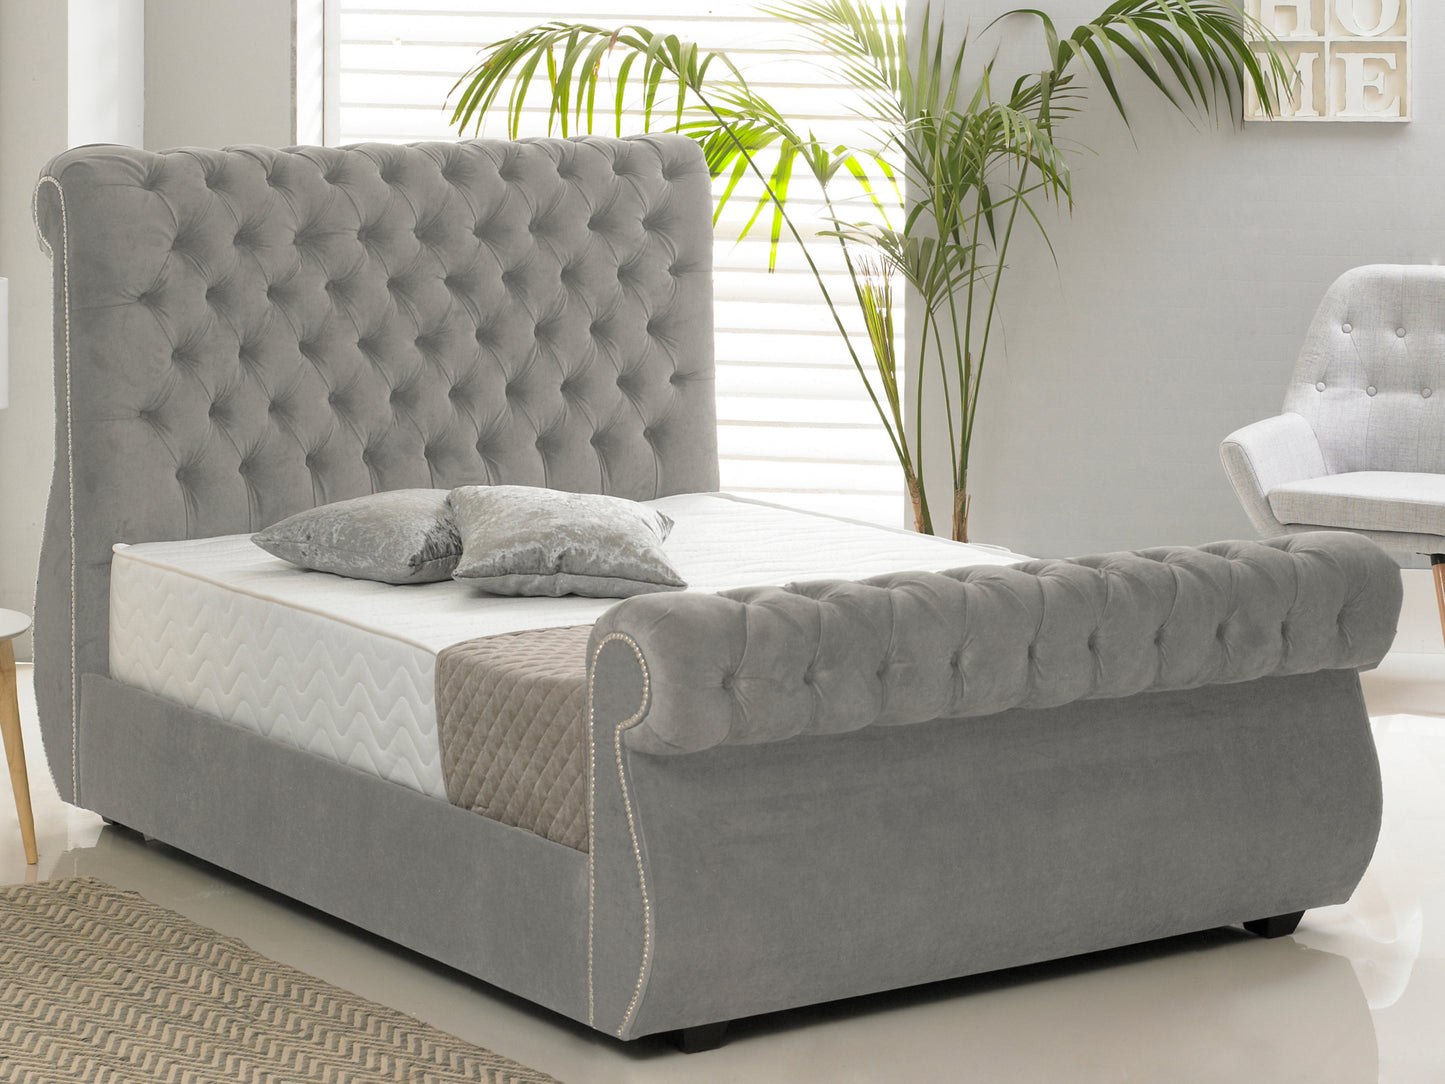 Chiswick Luxury Bed Frame in Hercules Silver